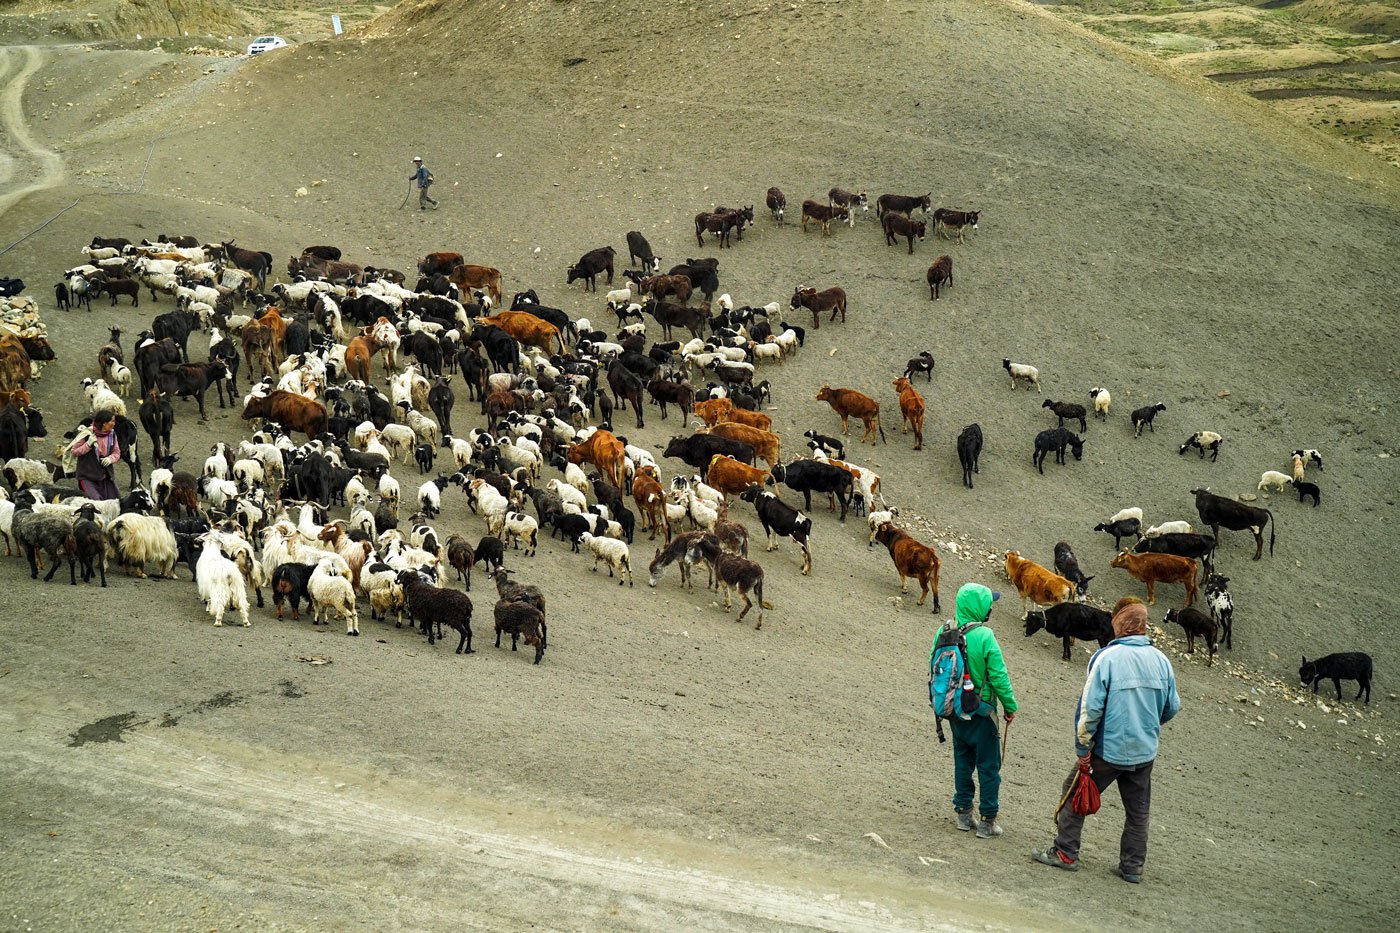 Chhering Angdui and other herders waiting for all the animals to gather to take them for grazing to higher pastures